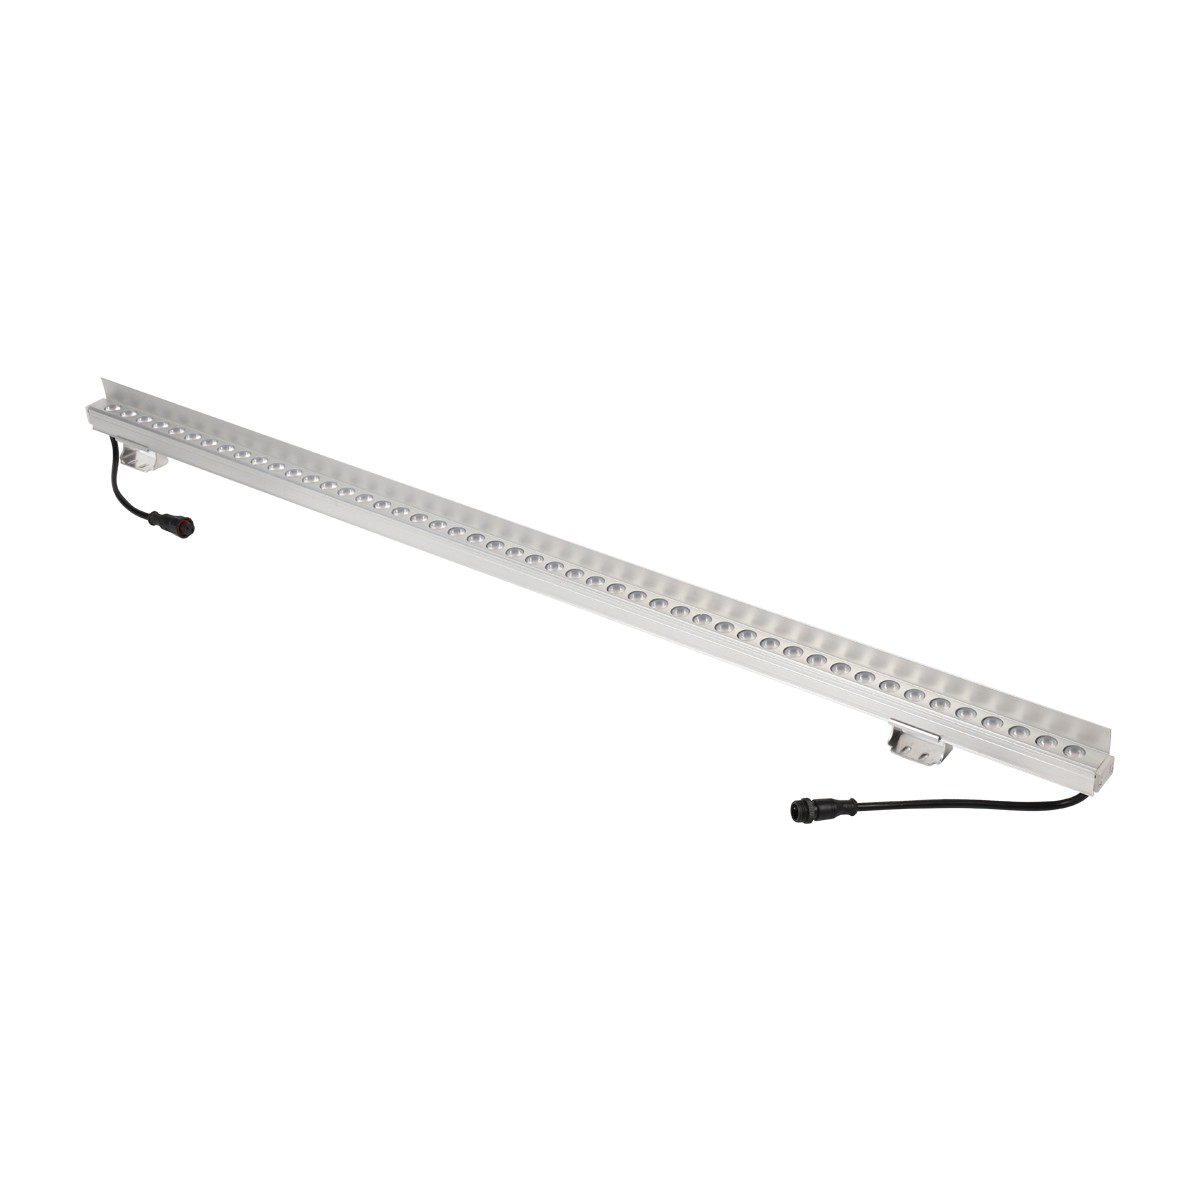 48W high power LED wall washer light with baffle 24V epoxy waterproof LED linear light